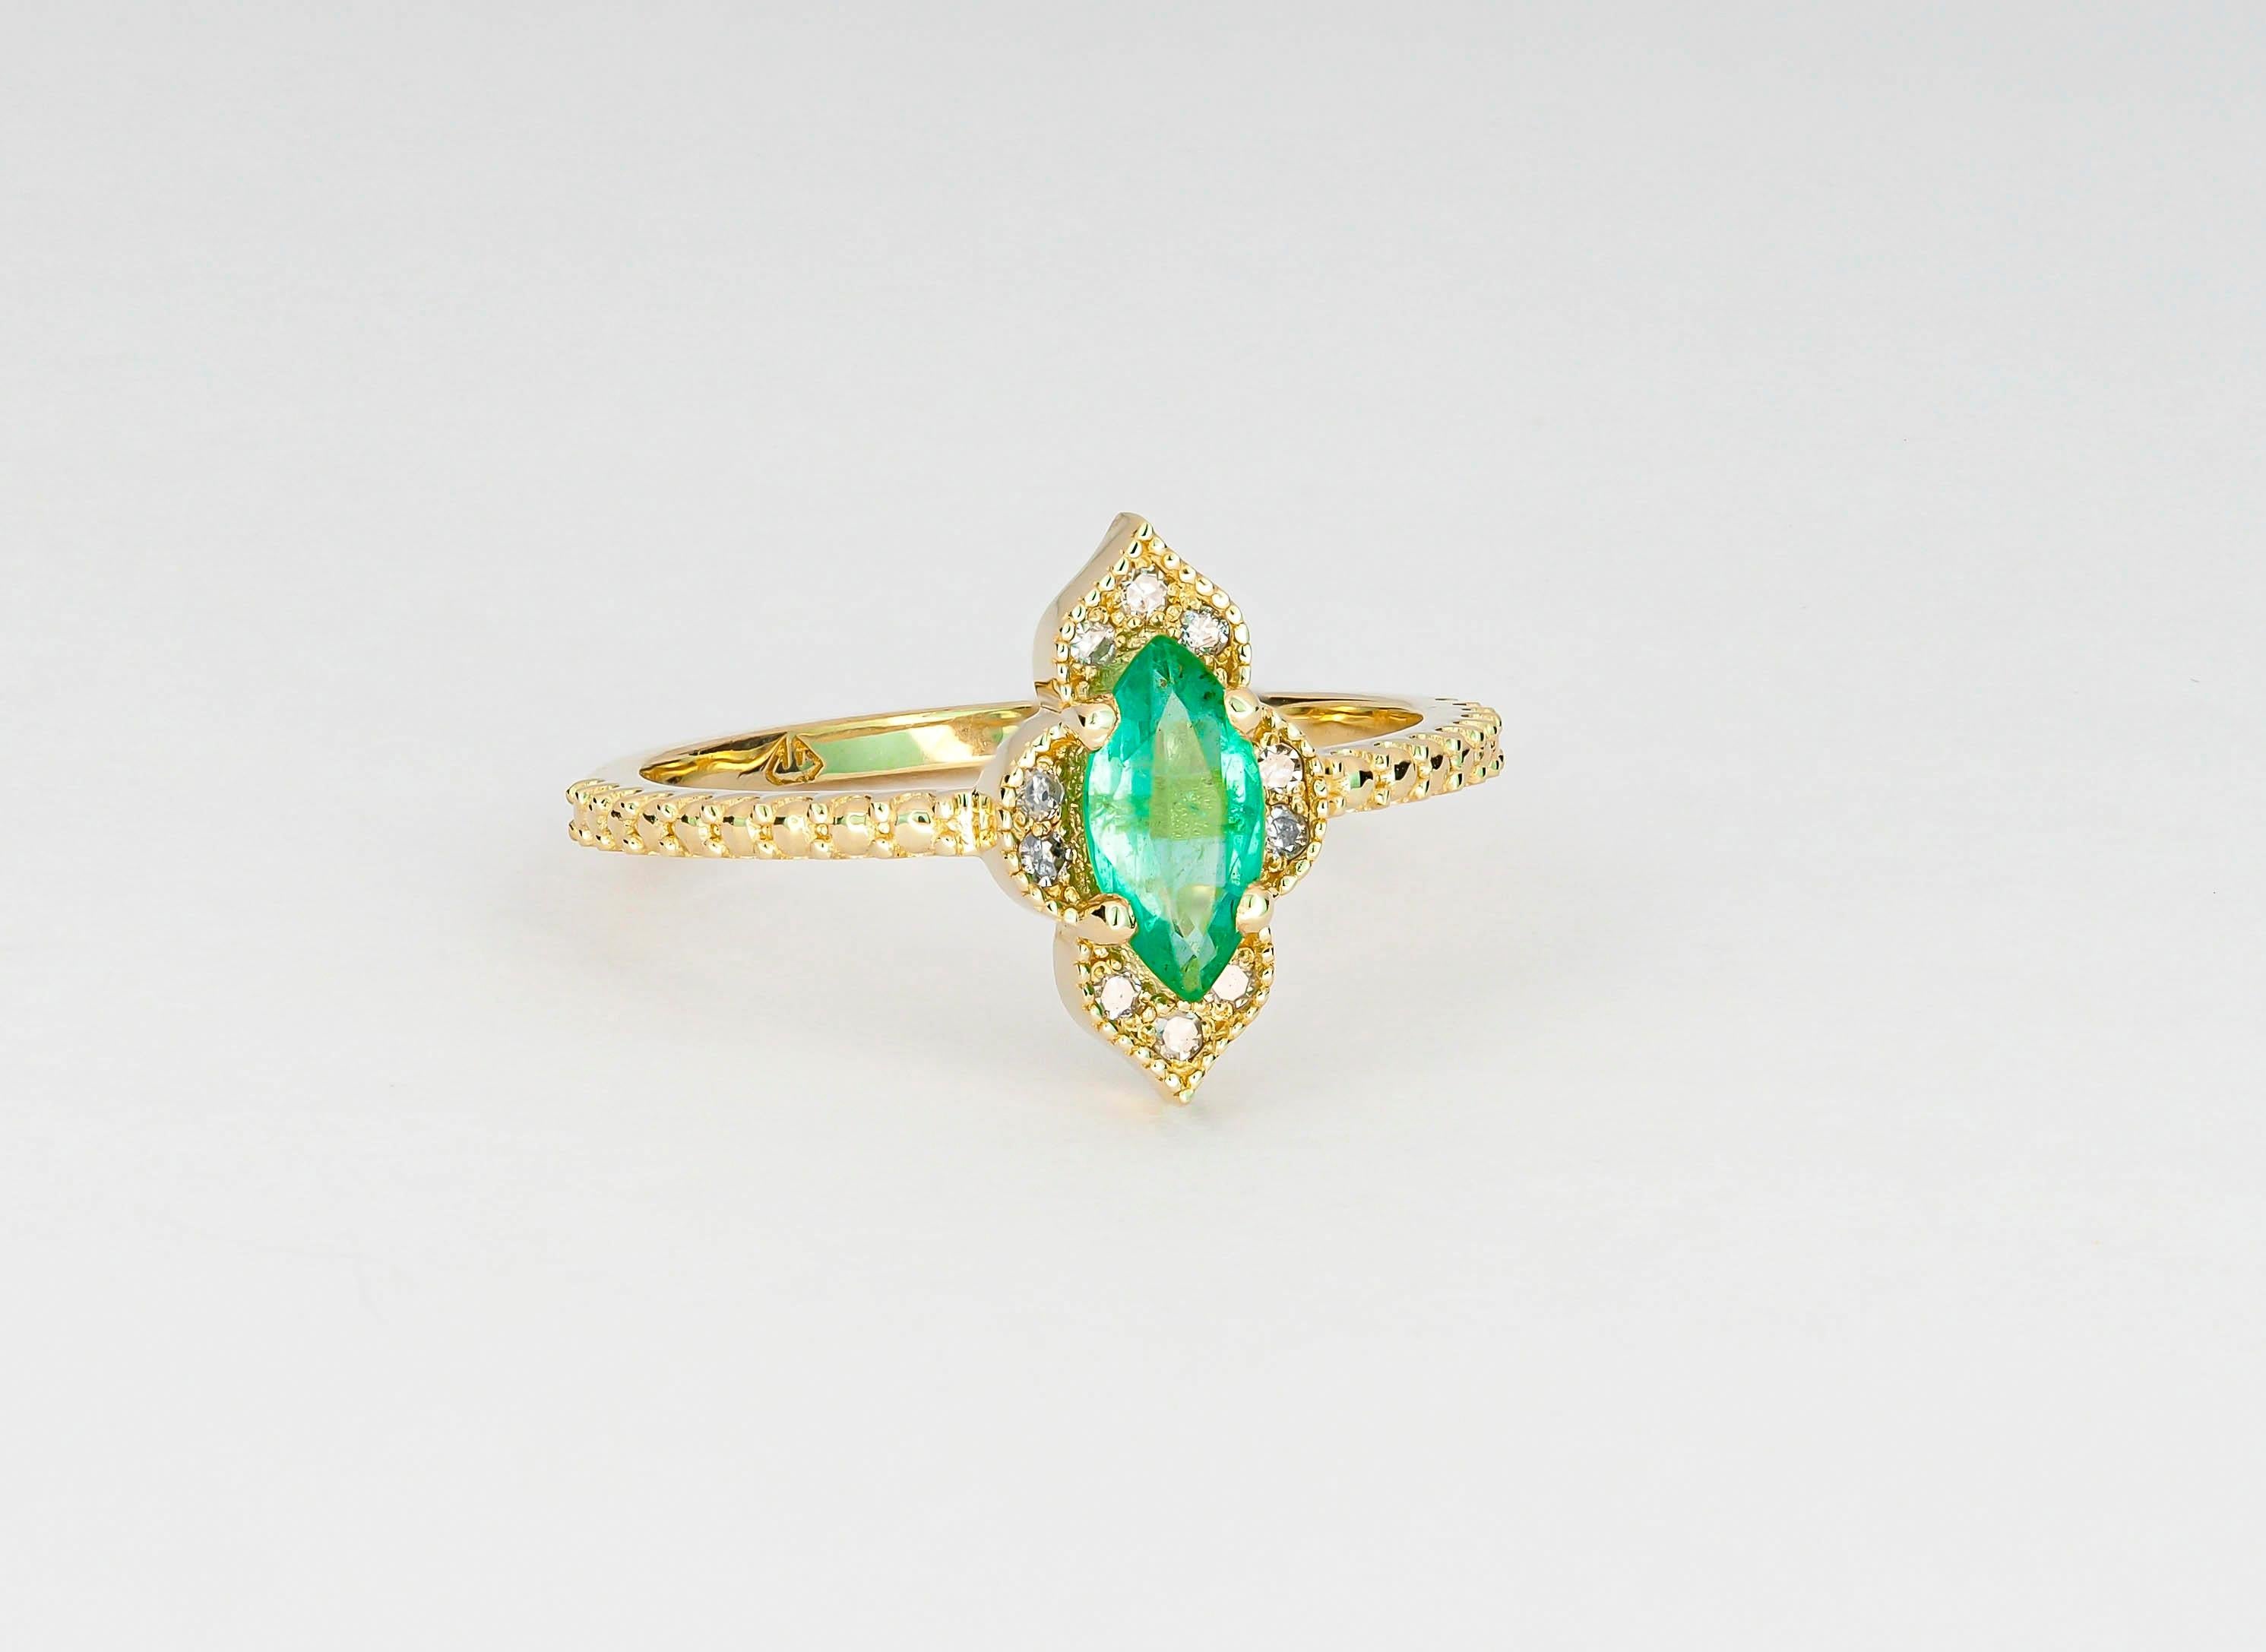 For Sale:  14k Gold Ring with Marquise Cut Emerald and Diamonds 6